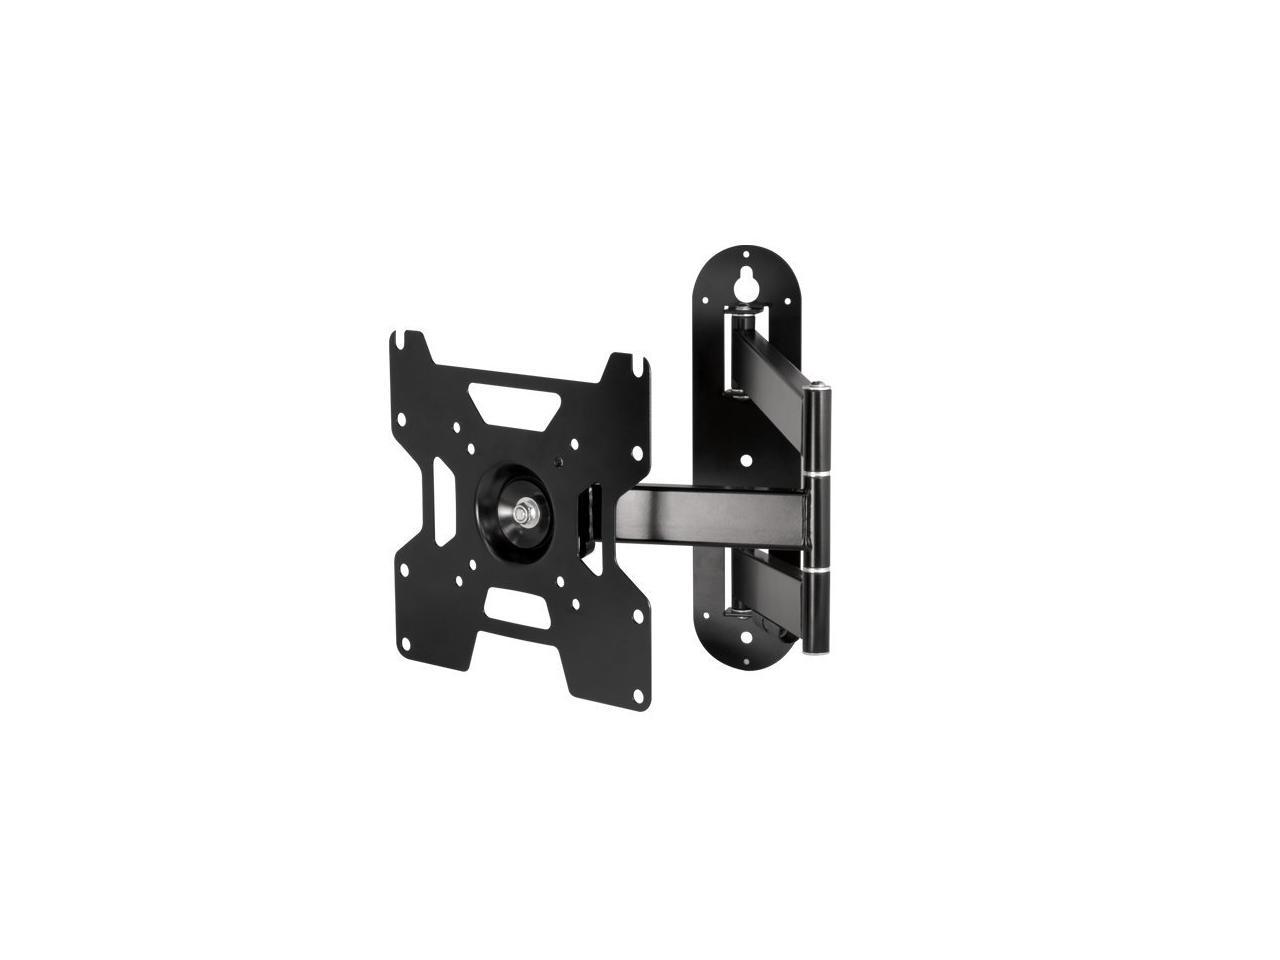 Arctic TV Flex S Full Motion Wall Mount bracket for 22 55 Inch LED / LCD / Plasma TV fits, Up to 25kg weight capacity Color Black Model AEMNT00043A